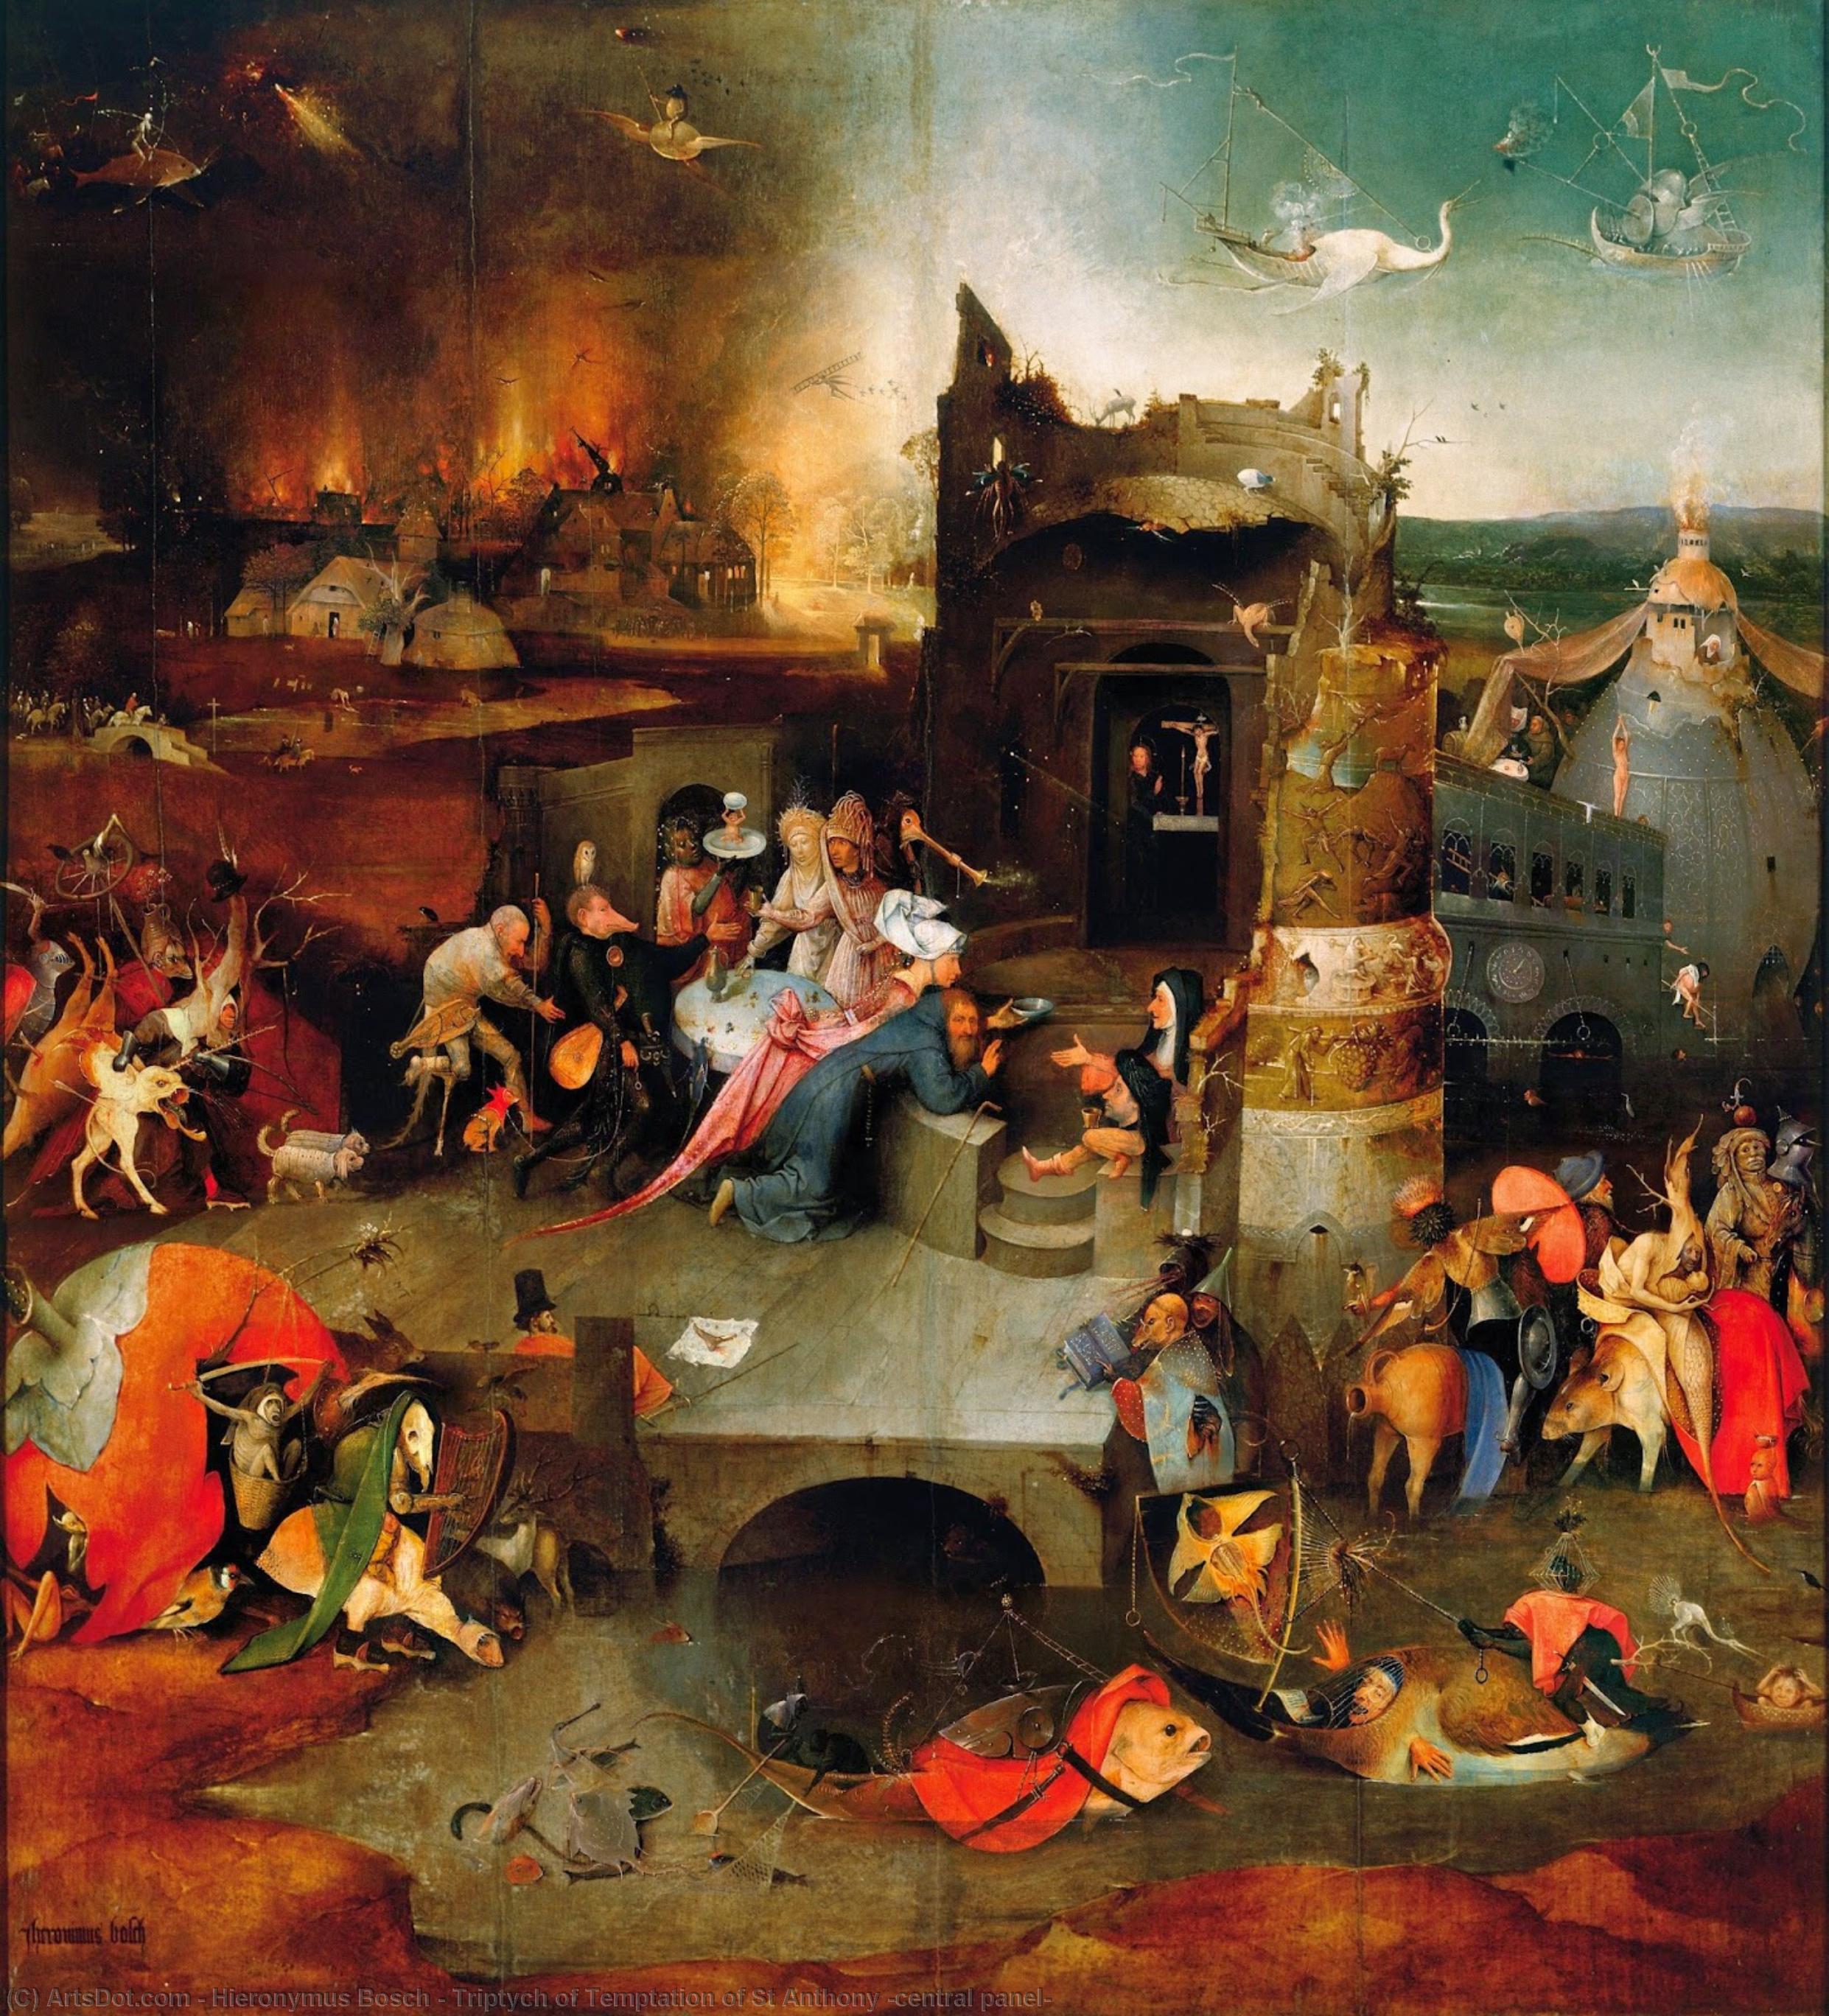 WikiOO.org - Encyclopedia of Fine Arts - Maalaus, taideteos Hieronymus Bosch - Triptych of Temptation of St Anthony (central panel)